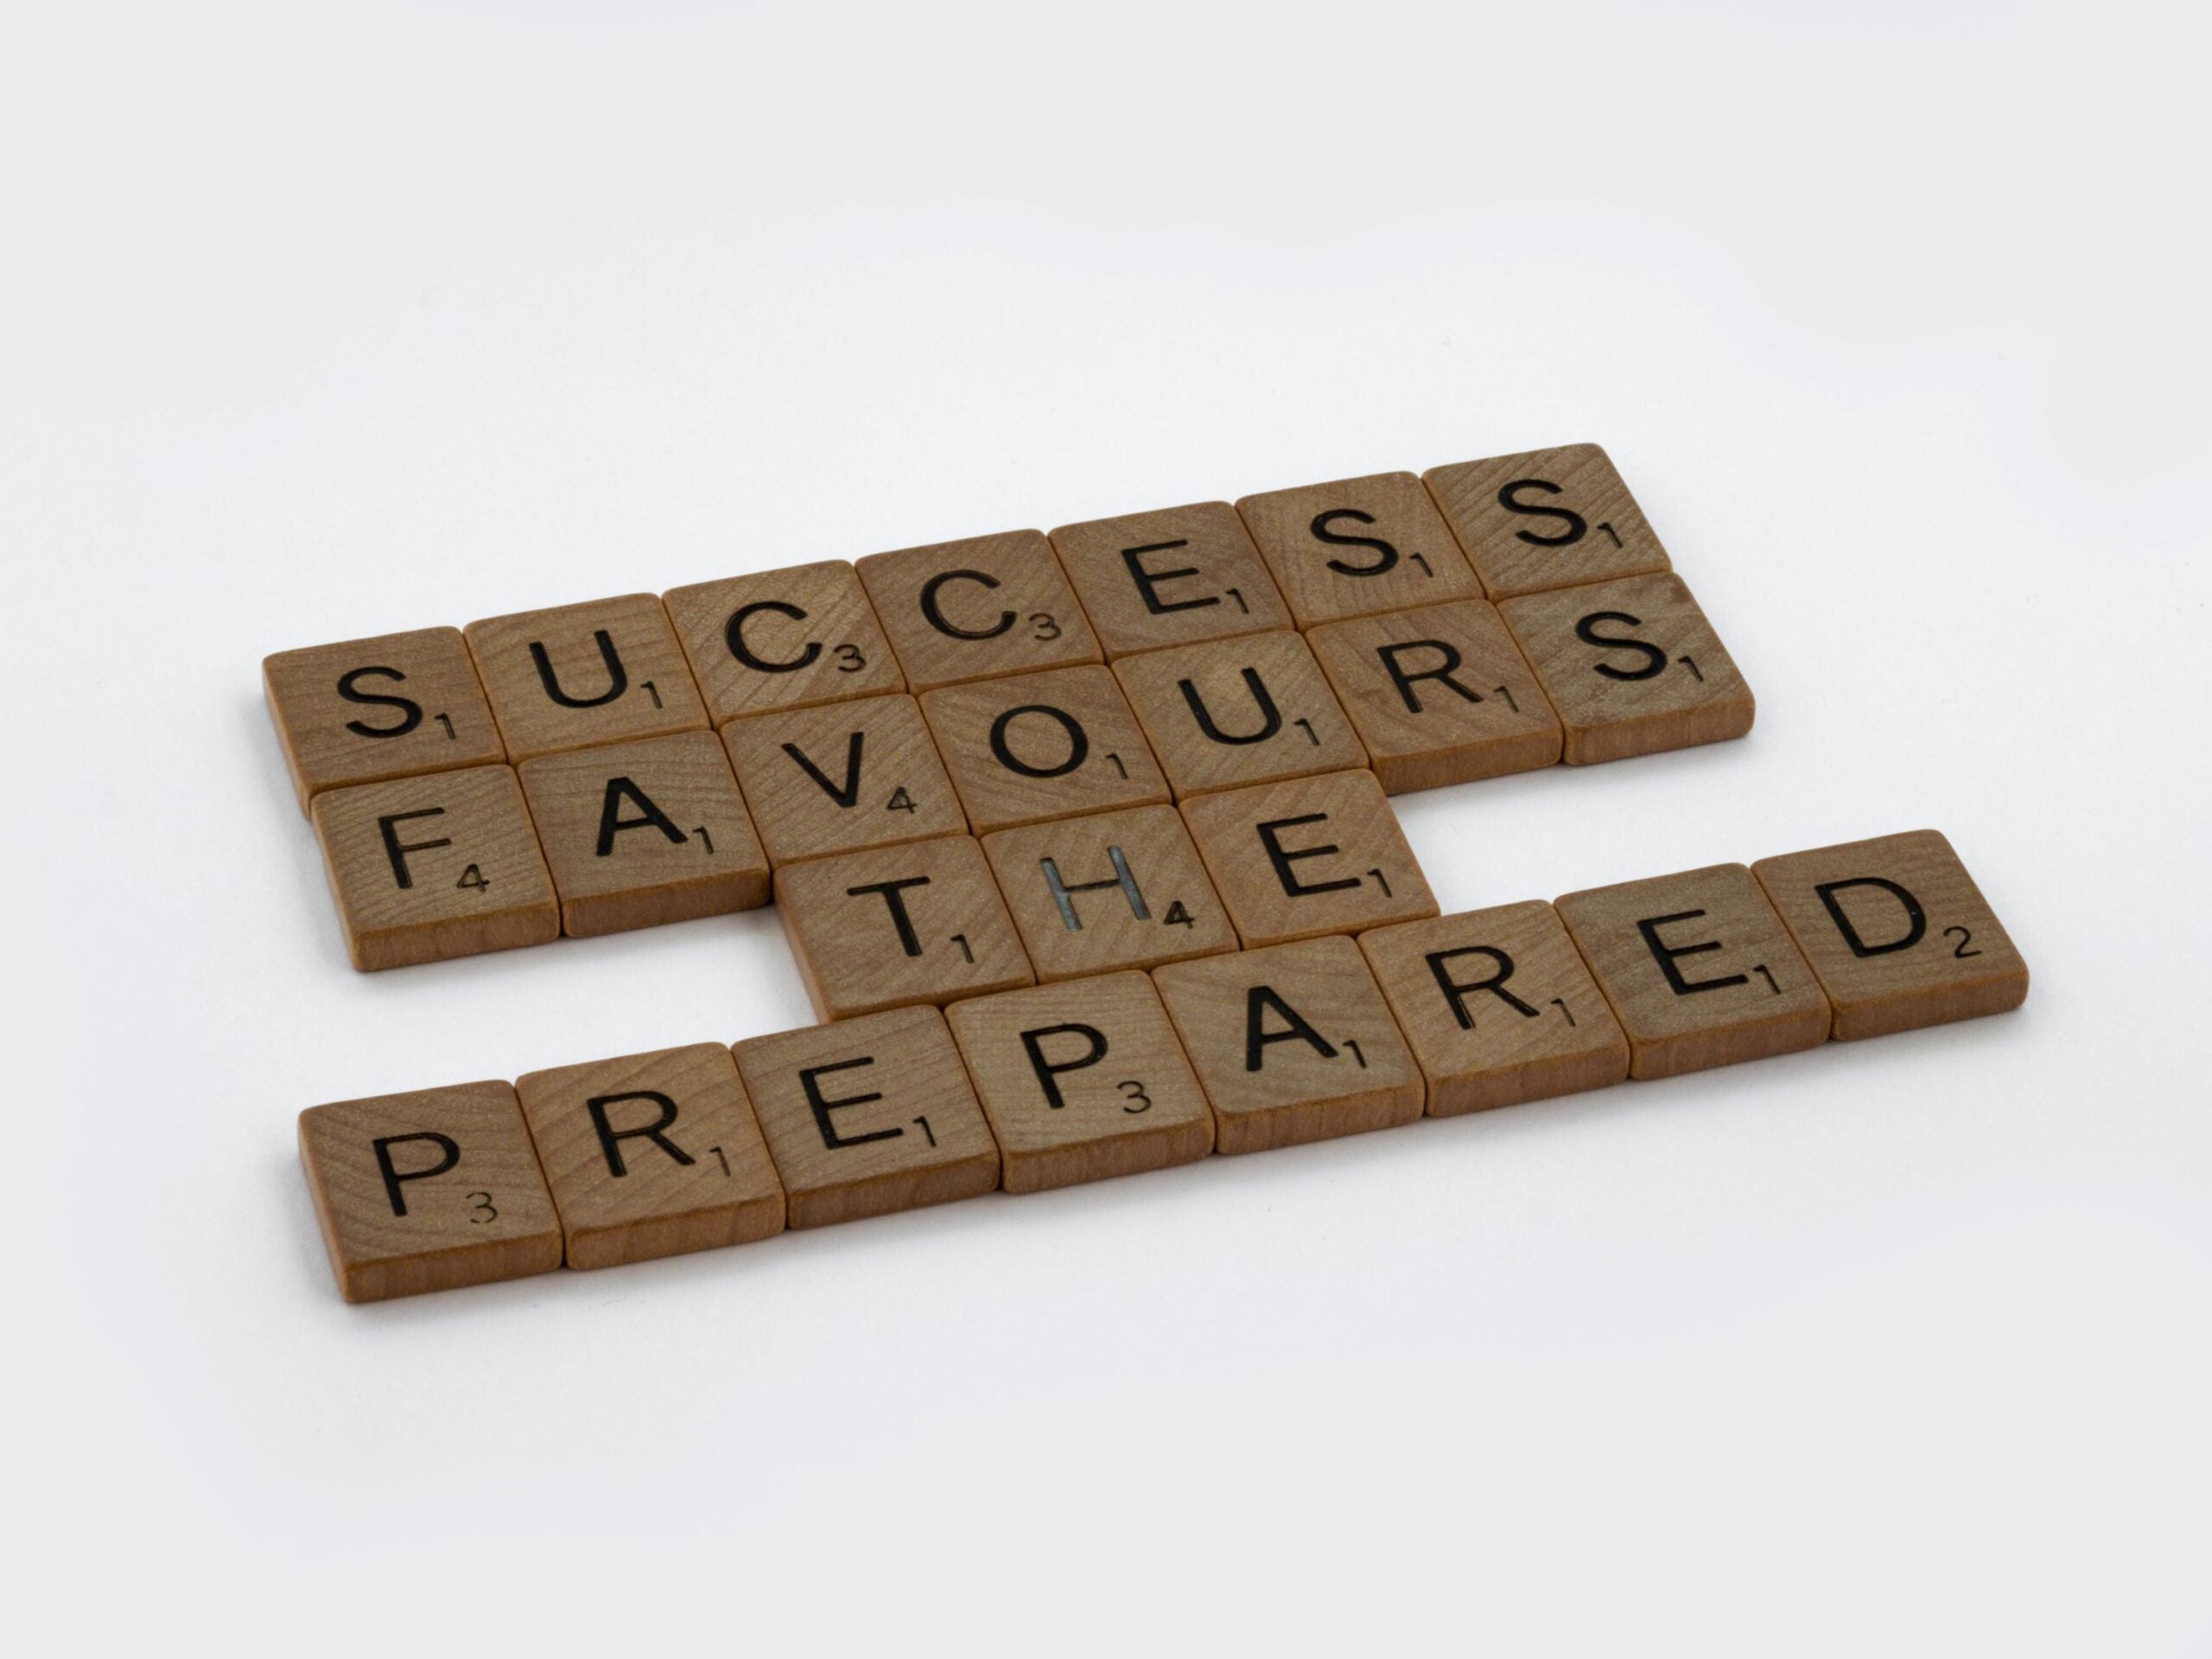 titles that say "success favours the prepared"